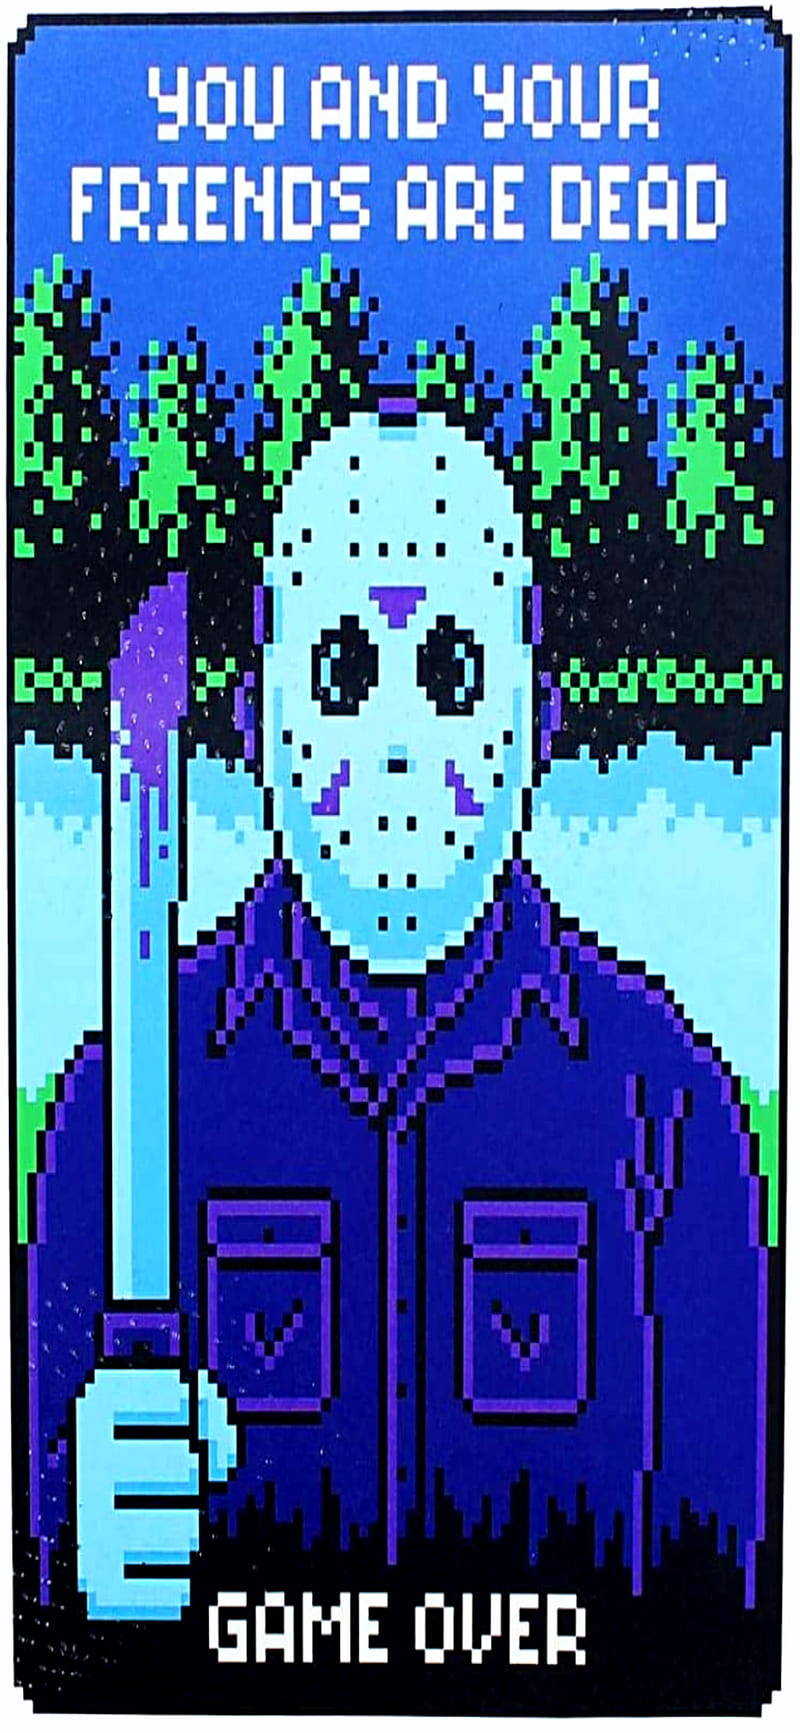 Download Friday The 13Th: The Game wallpapers for mobile phone, free  Friday The 13Th: The Game HD pictures